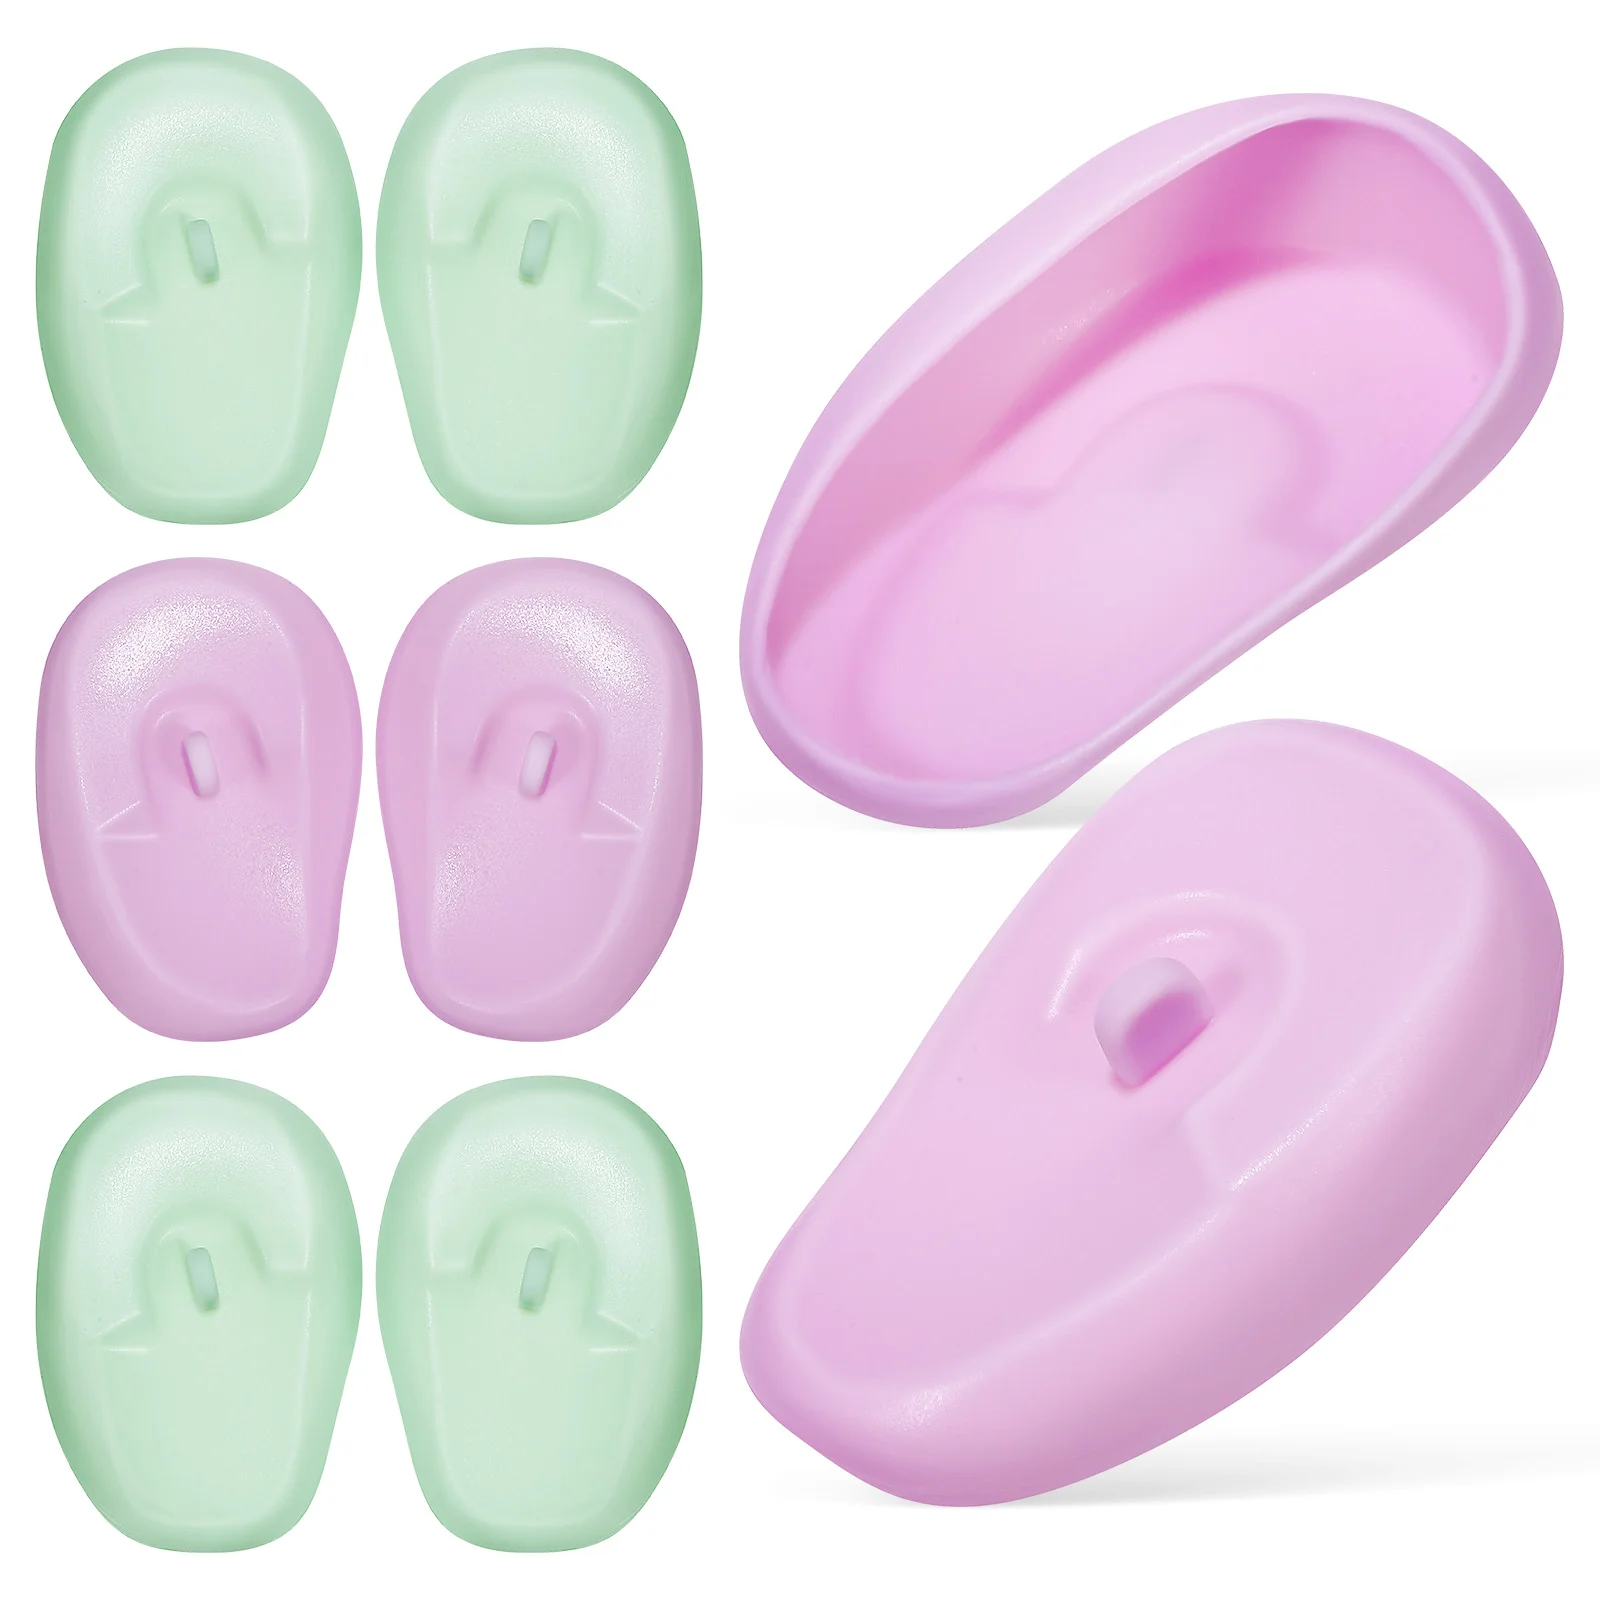 

4 Pairs Hairdressing Ear Covers Protectors Cuffs High Temperature Resistance For Dryer Silica Gel Dye Coloring Tools